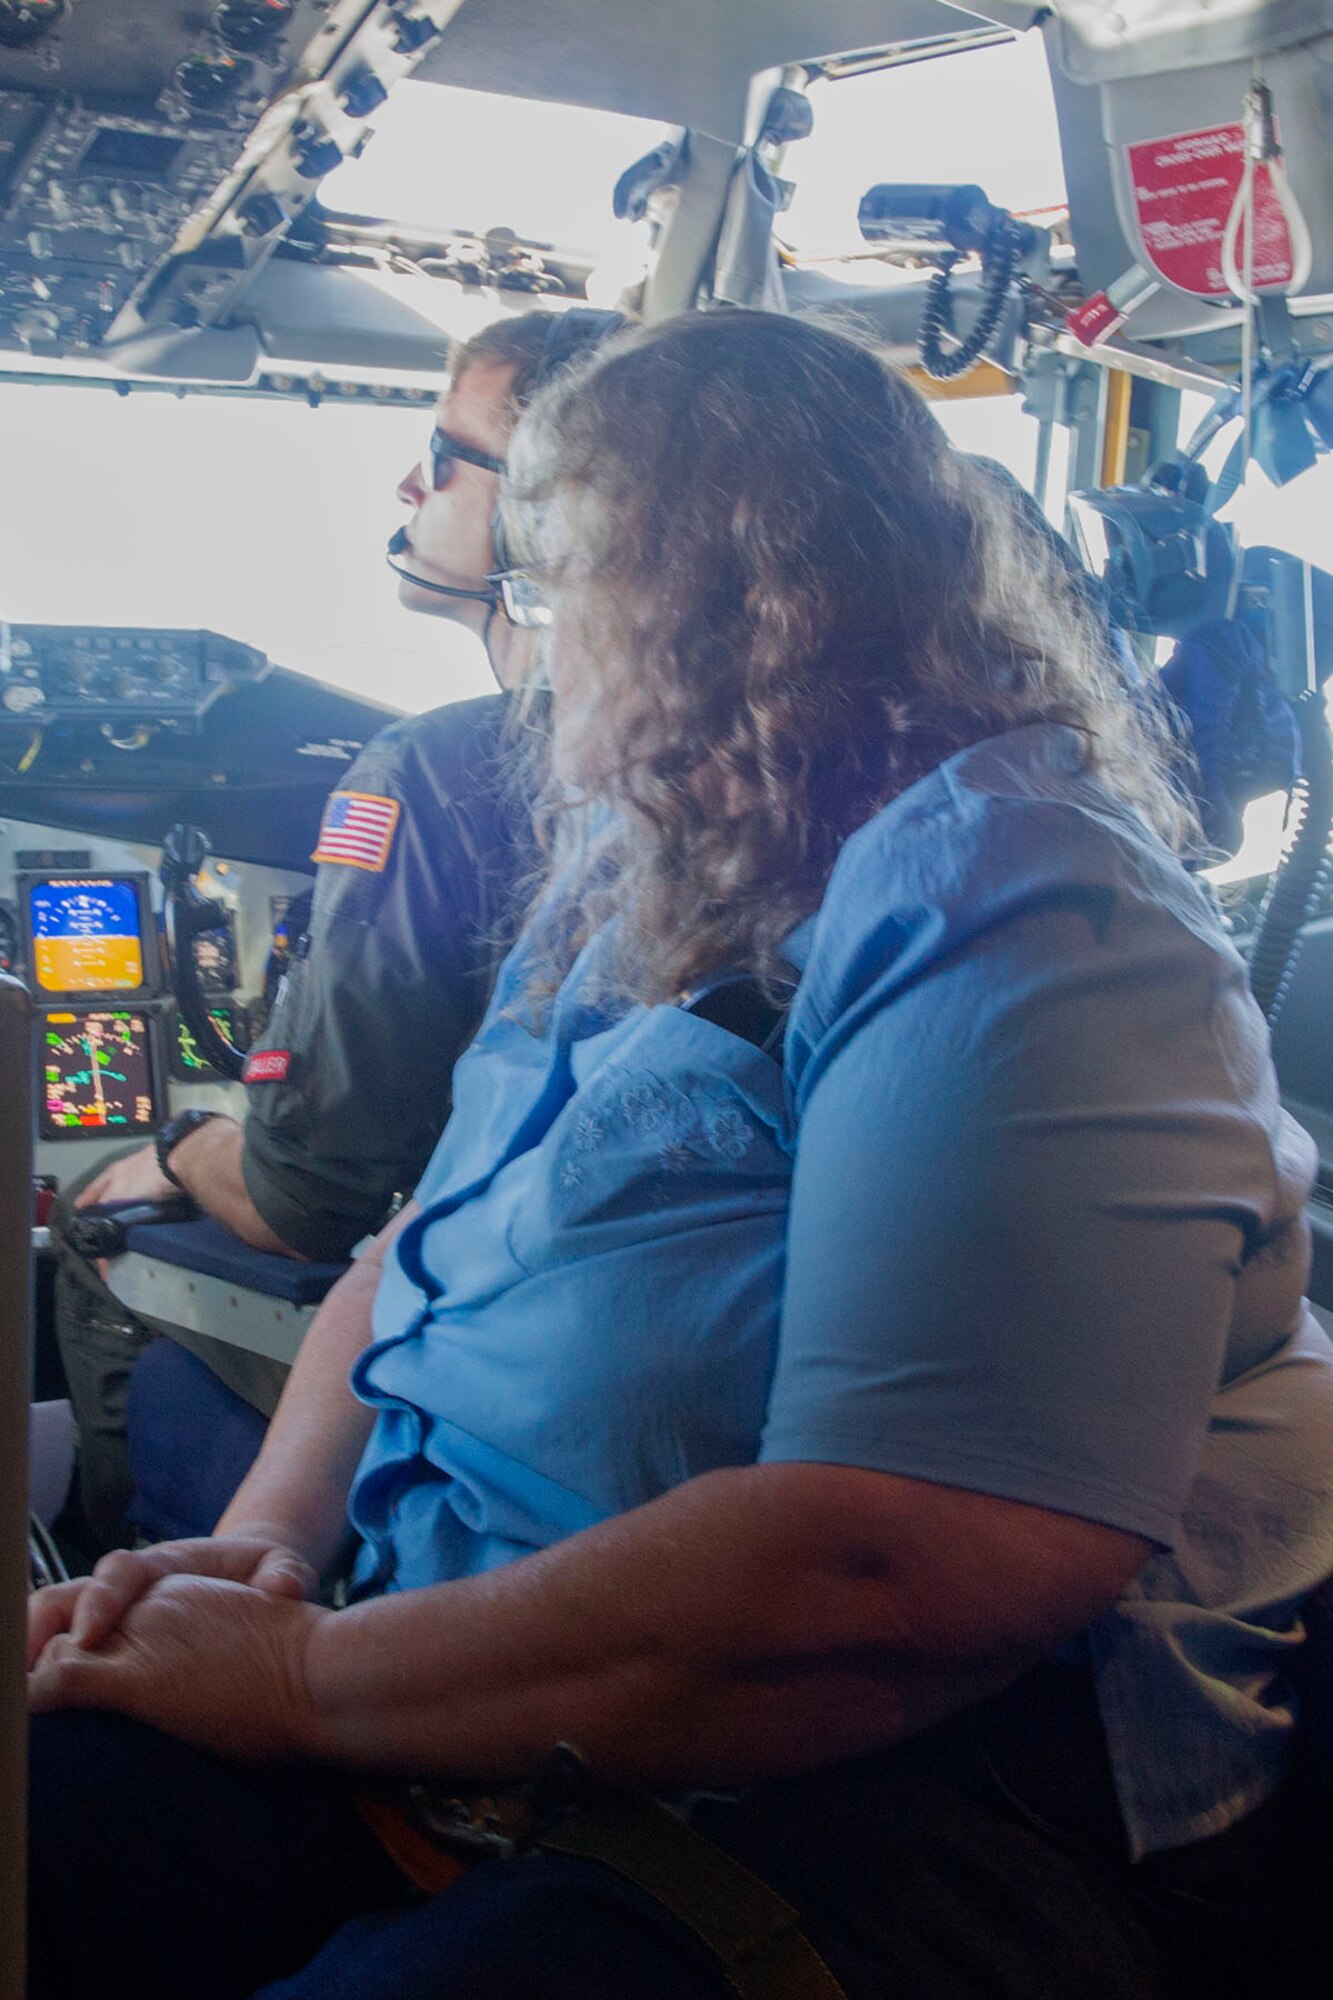 A team member with the dining facility at Grissom Air Reserve Base observes pilots in the flight deck during a refueling in one of Grissom’s KC-135R Stratotankers, June 25, 2019. Services support staff from throughout the base got a firsthand look at the mission they help support at Grissom during an employee incentive flight.